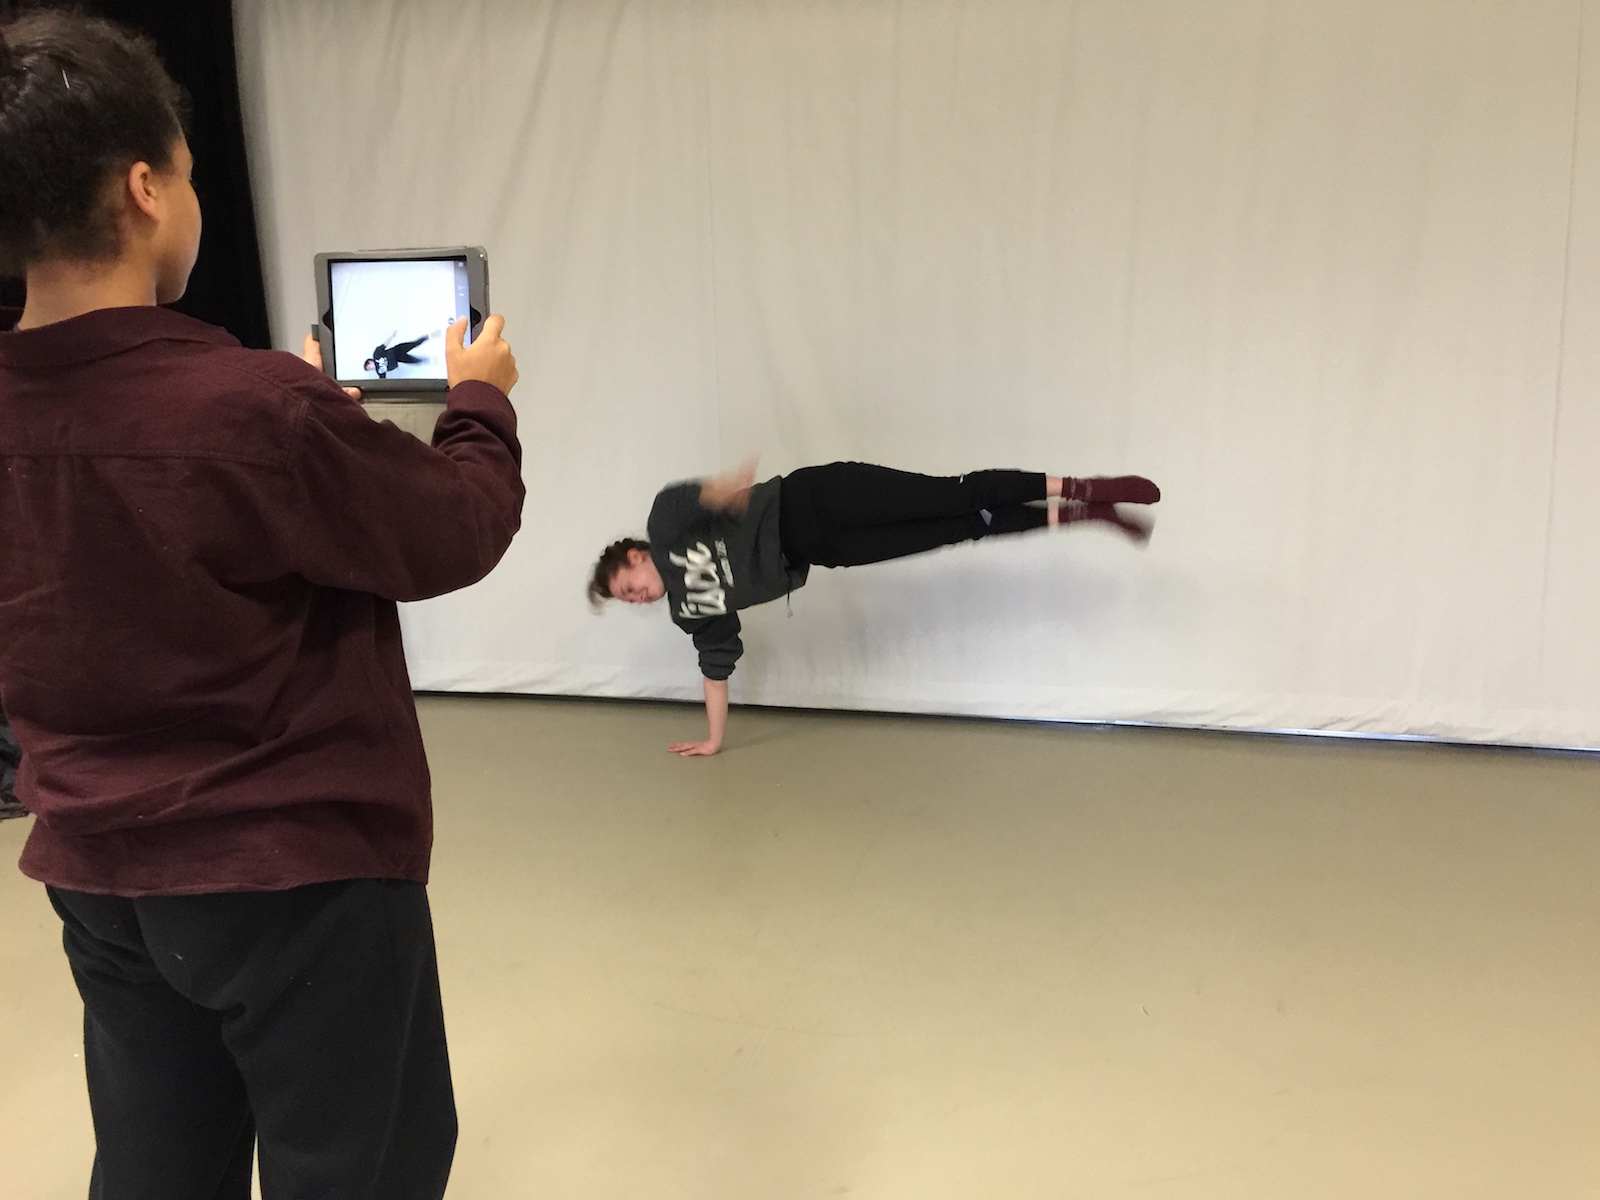 Tisch Dance and Technology students practice capturing moving bodies with IOS devices.